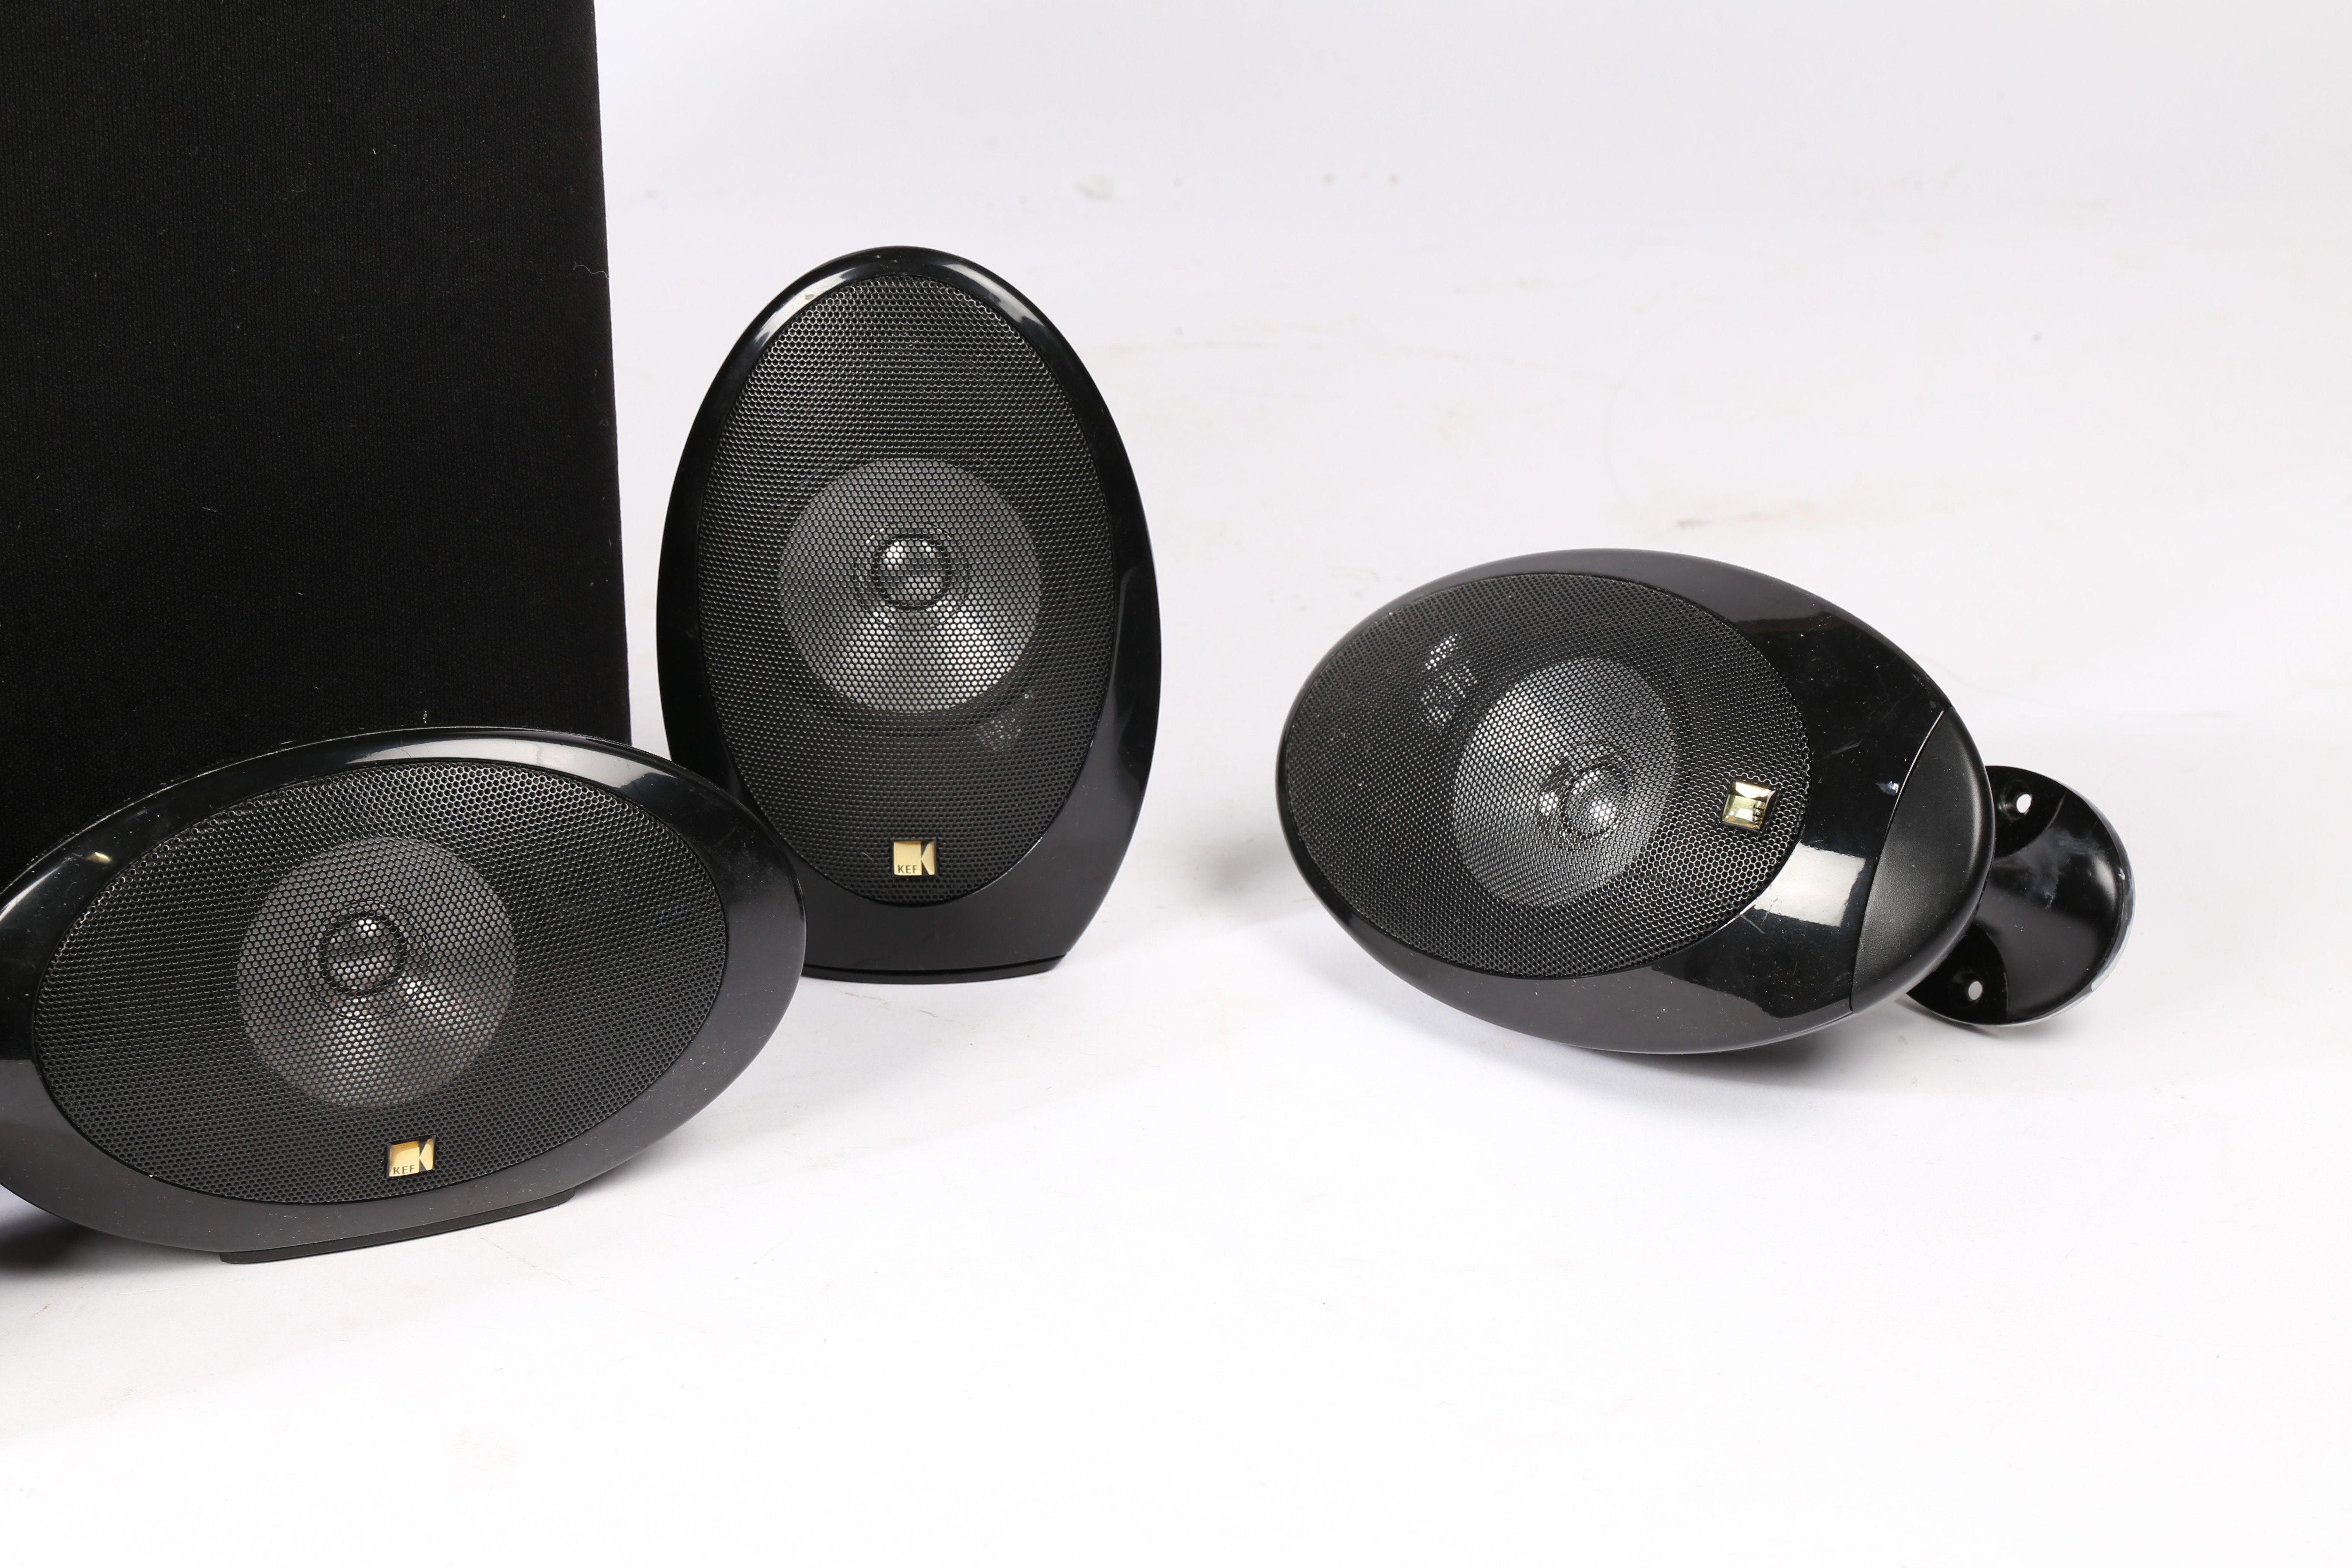 KEF KUBE-1 SUB AND 1000 SERIES HOME THEATRE SPEAKER SYSTEM. - Image 6 of 8